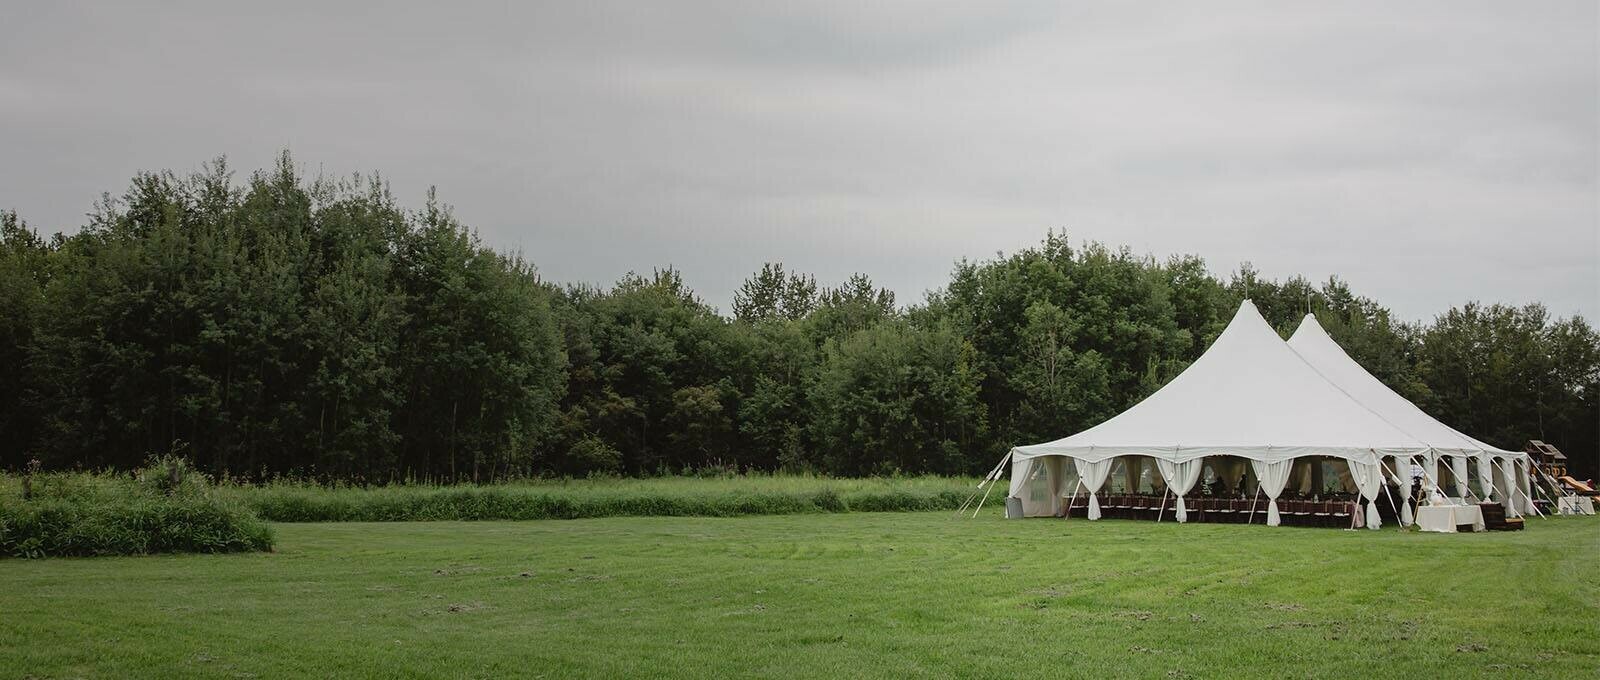 Tent Rentals Edmonton showcasing a white pole circus tent on a wide greenland with a green trees on the background